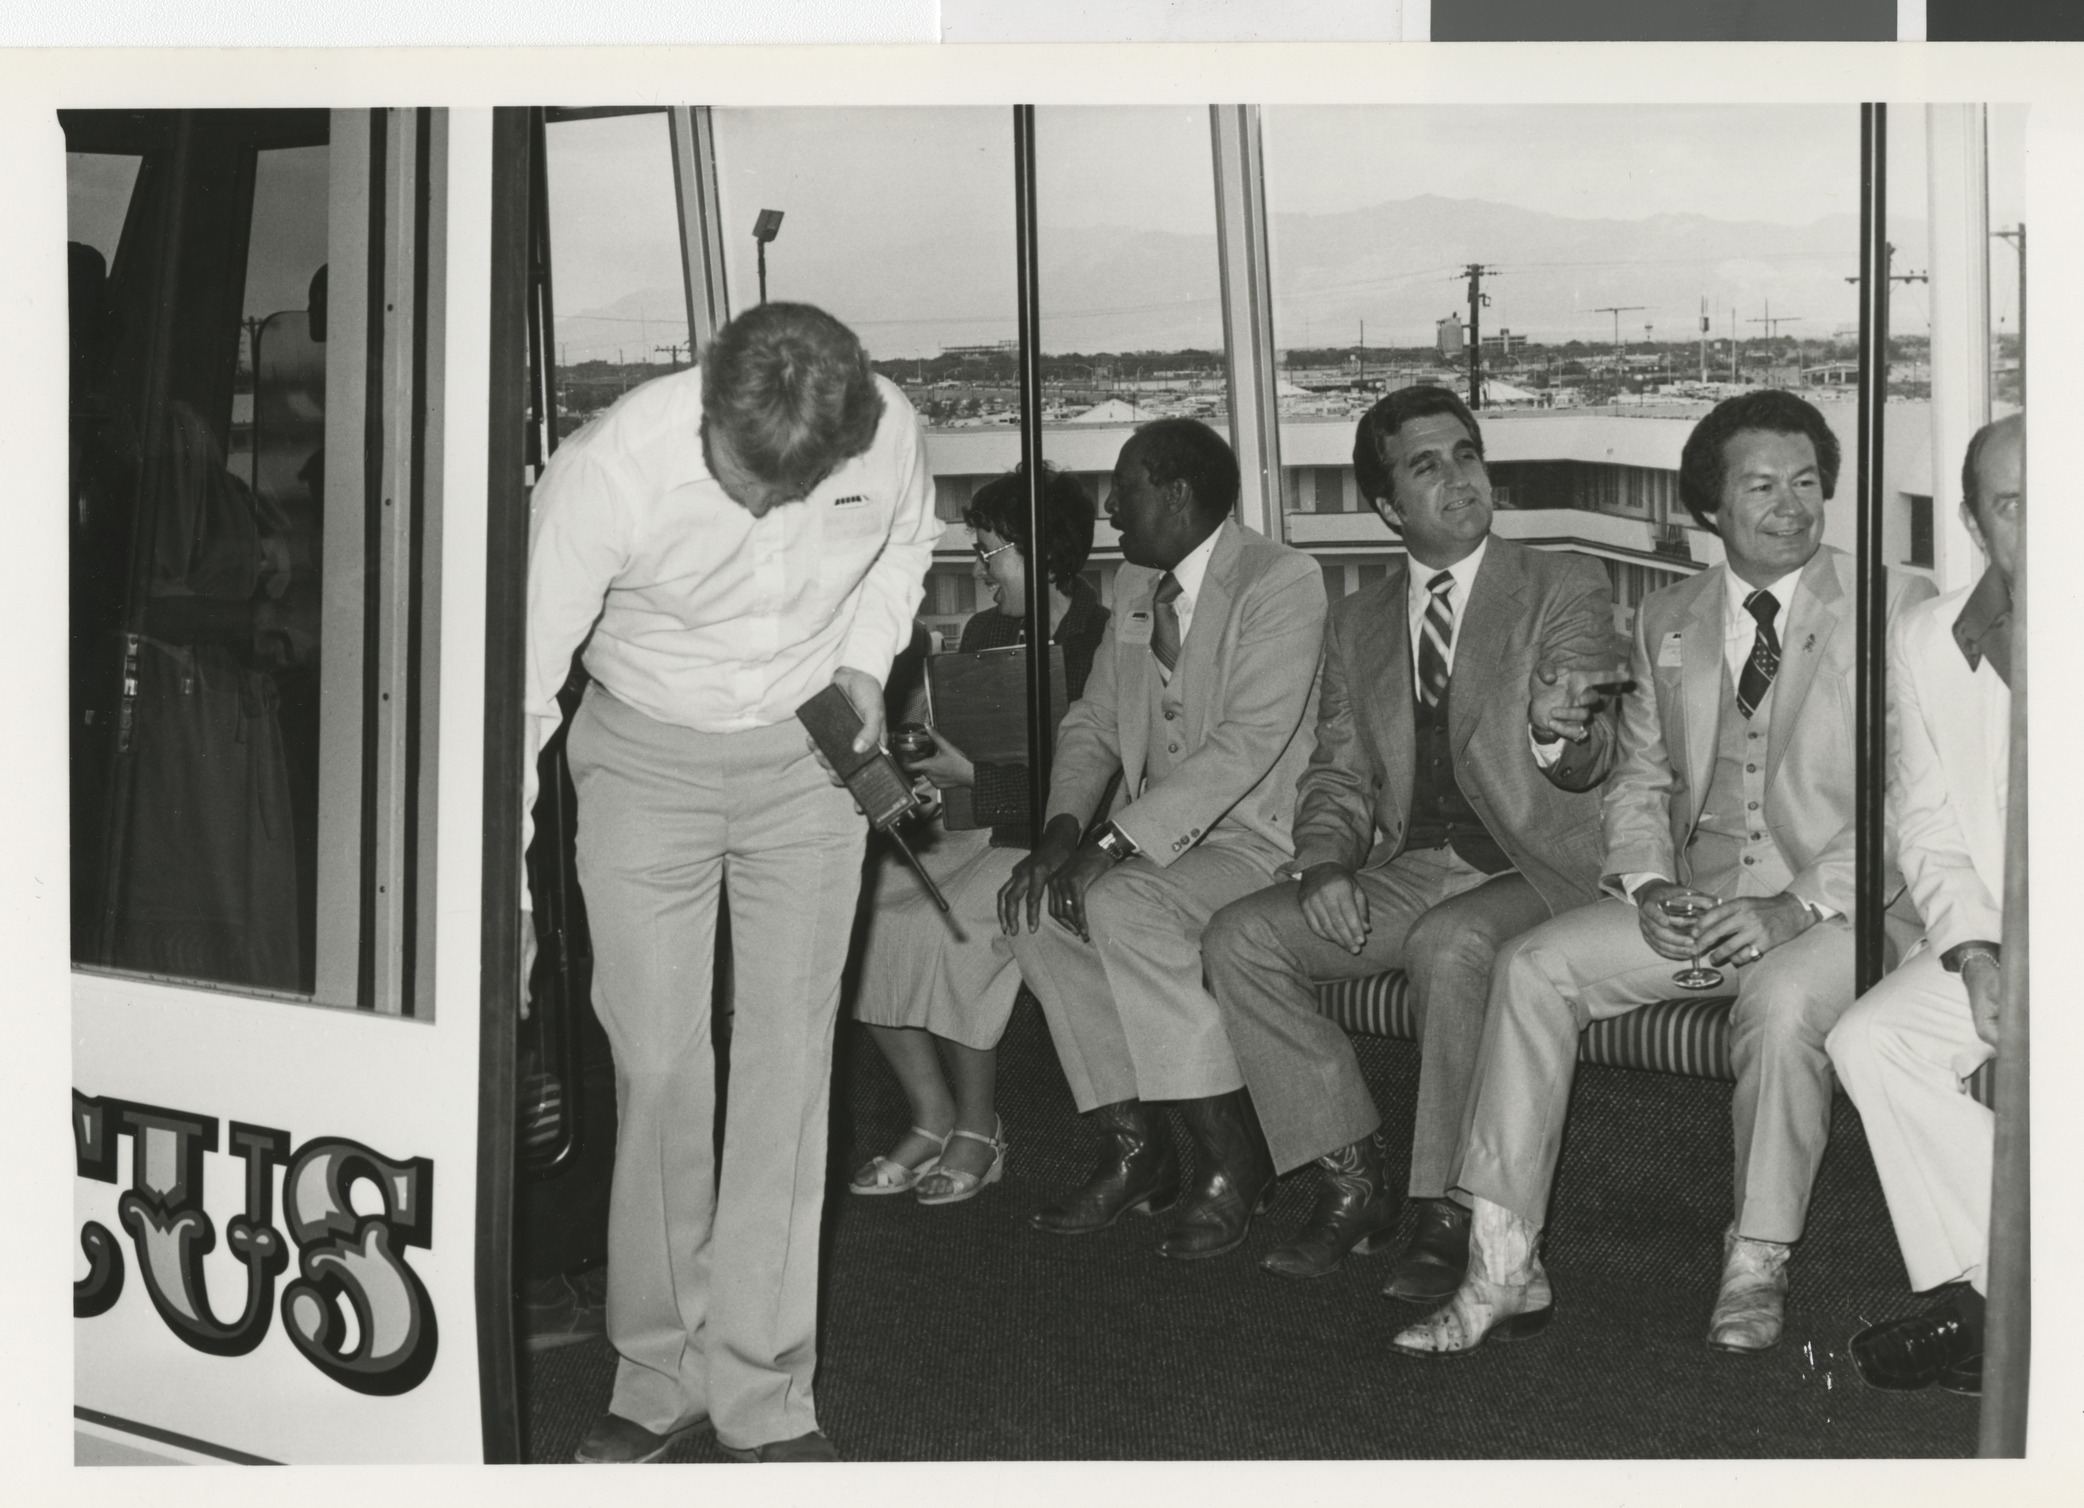 Photograph of group of men, including Commissioner Ron Lurie, on a bus, shuttle or train